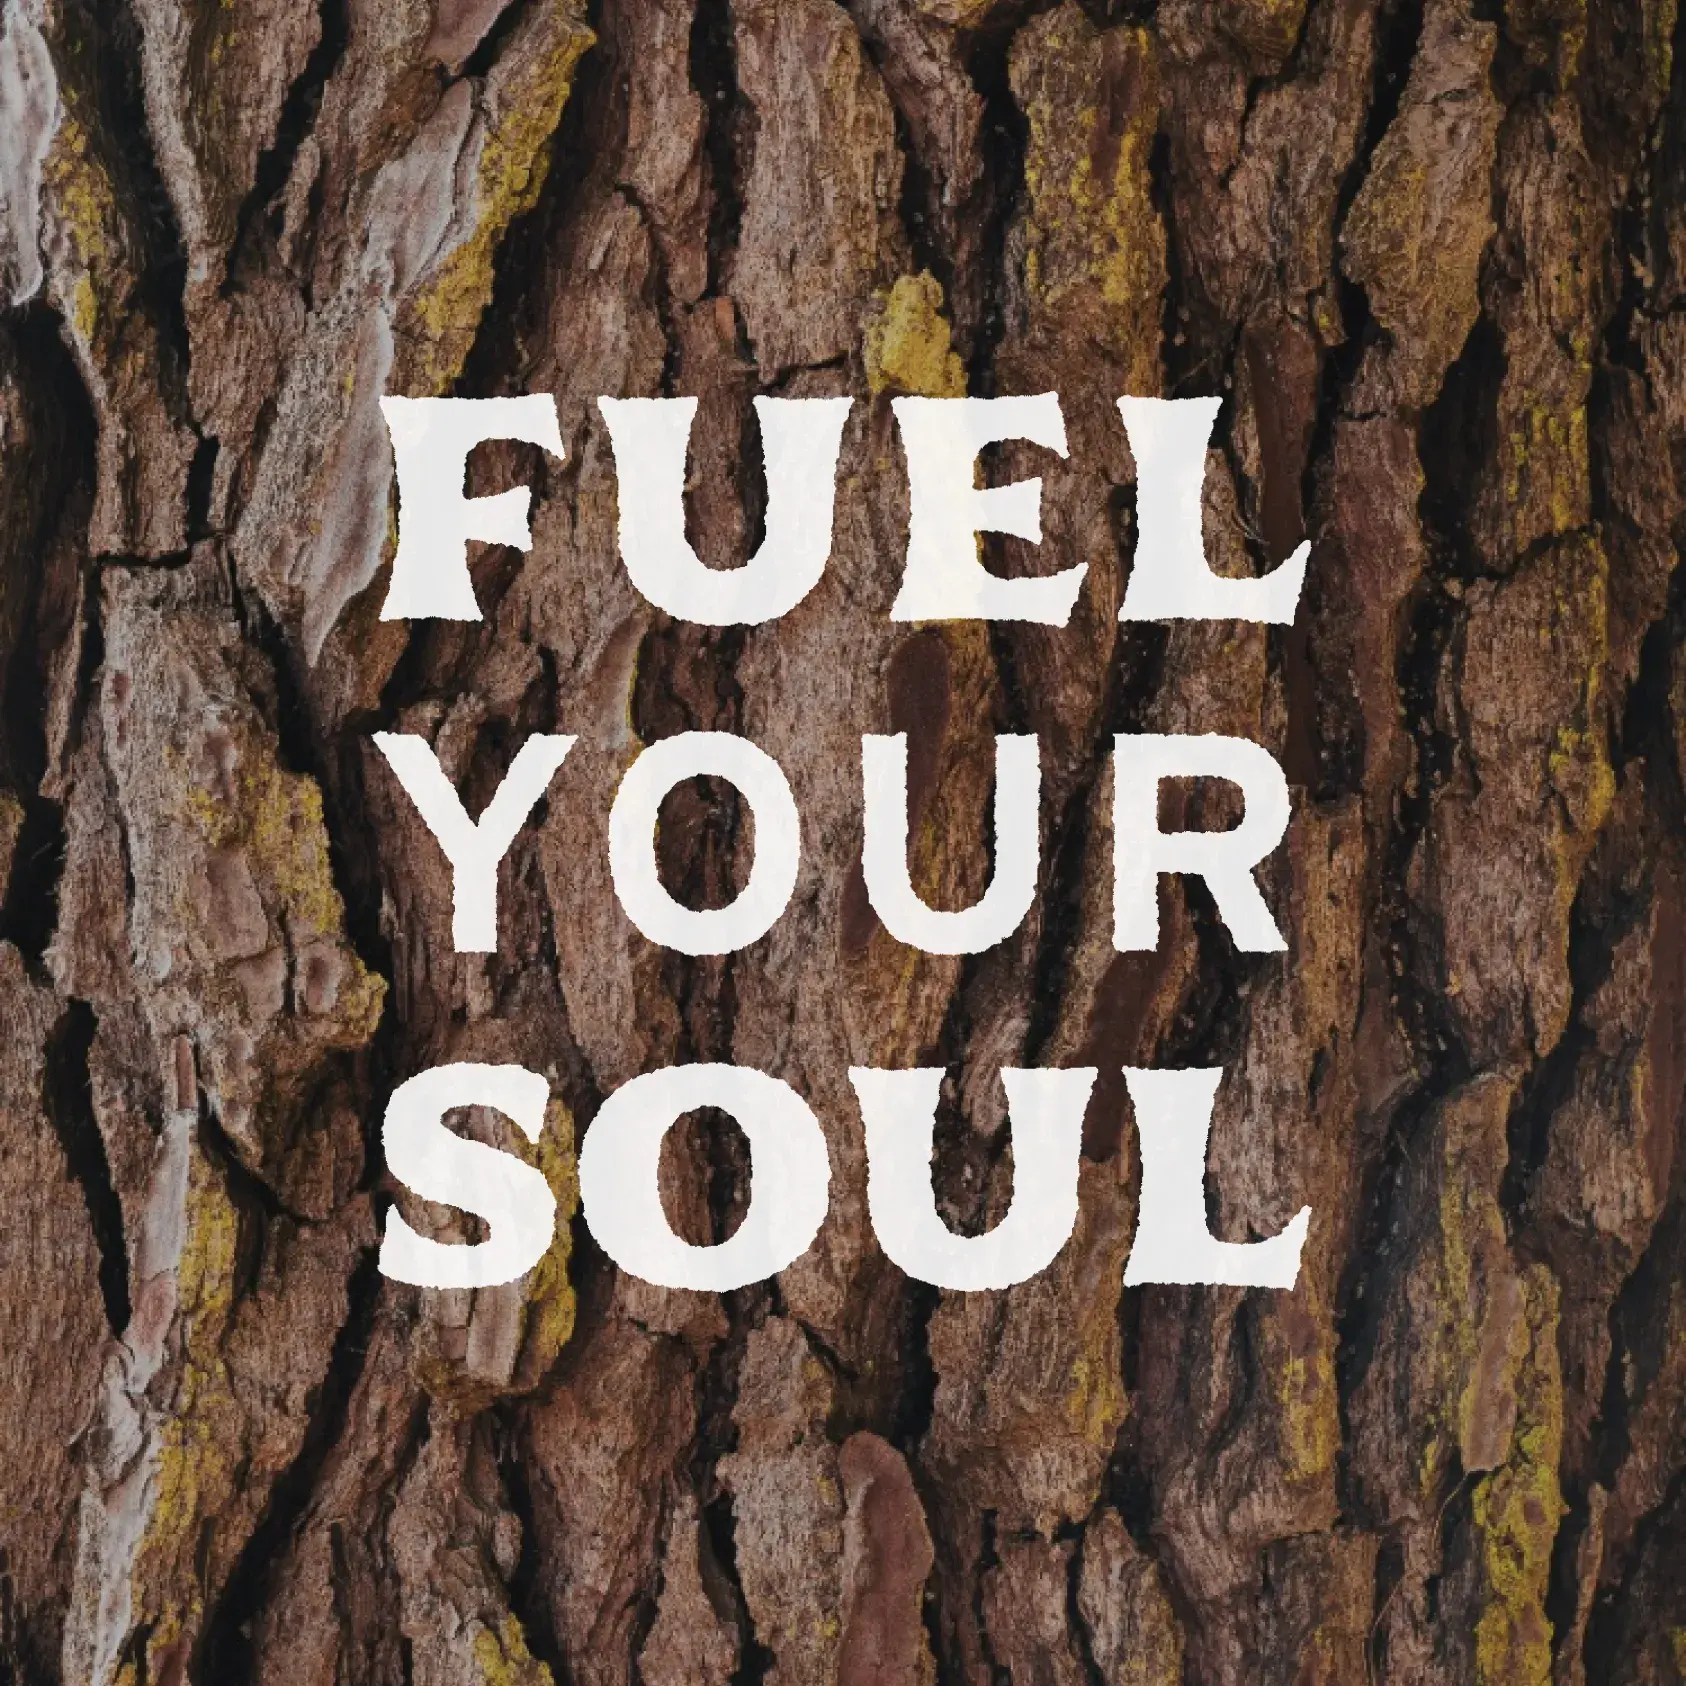 Stylized "Fuel Your Soul" imposed over tree bark